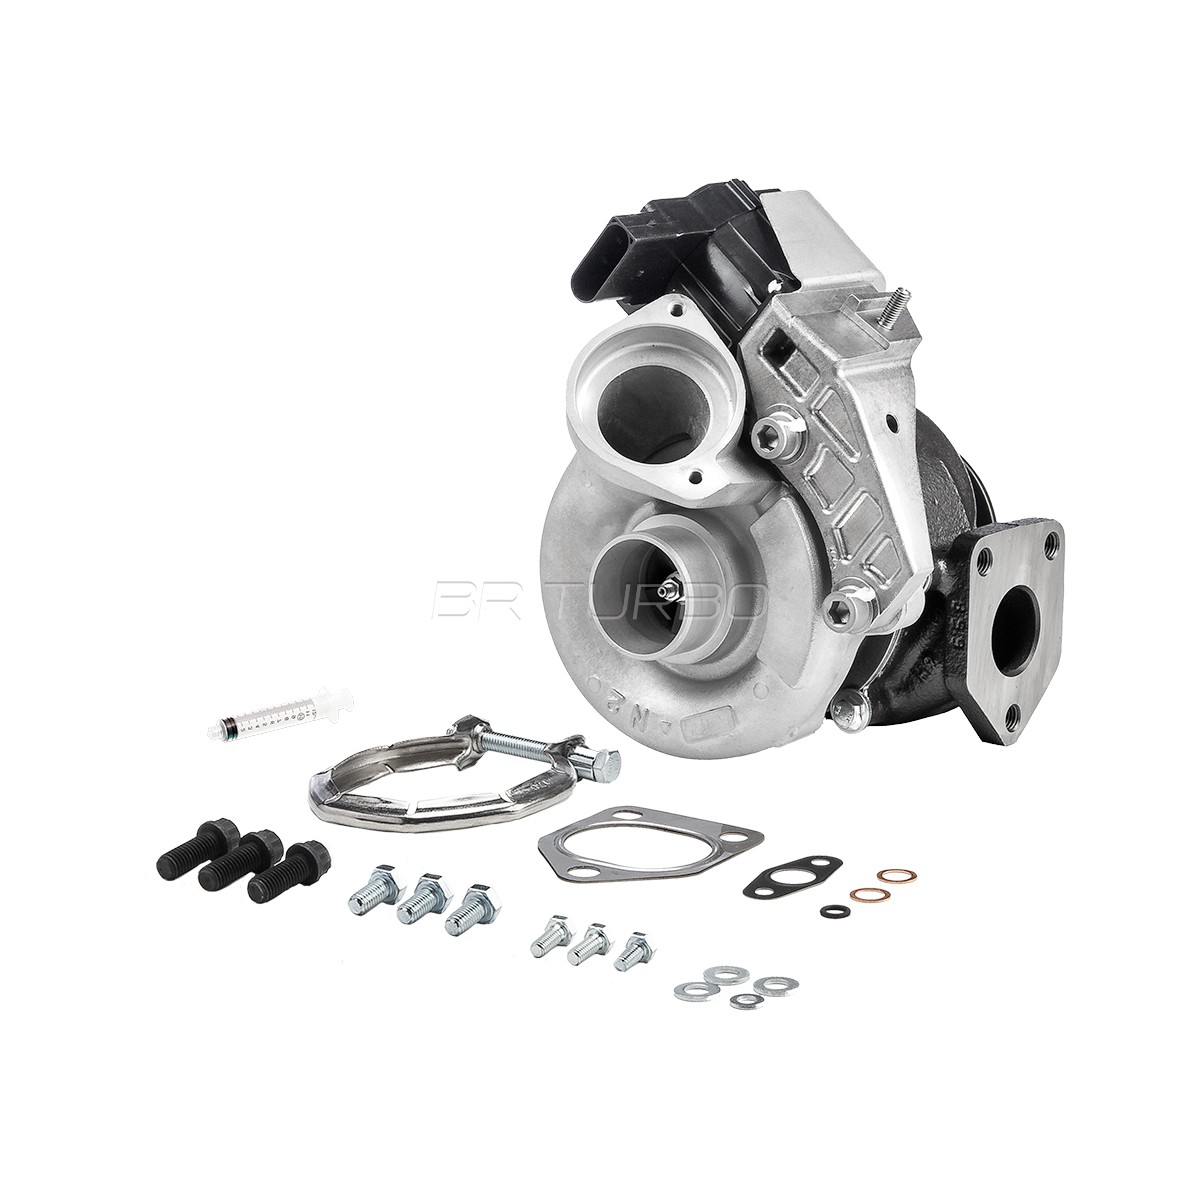 49S3505761RSM Turbocharger REMANUFACTURED TURBOCHARGER WITH MOUNTING KIT BR Turbo 49S3505761RSM review and test